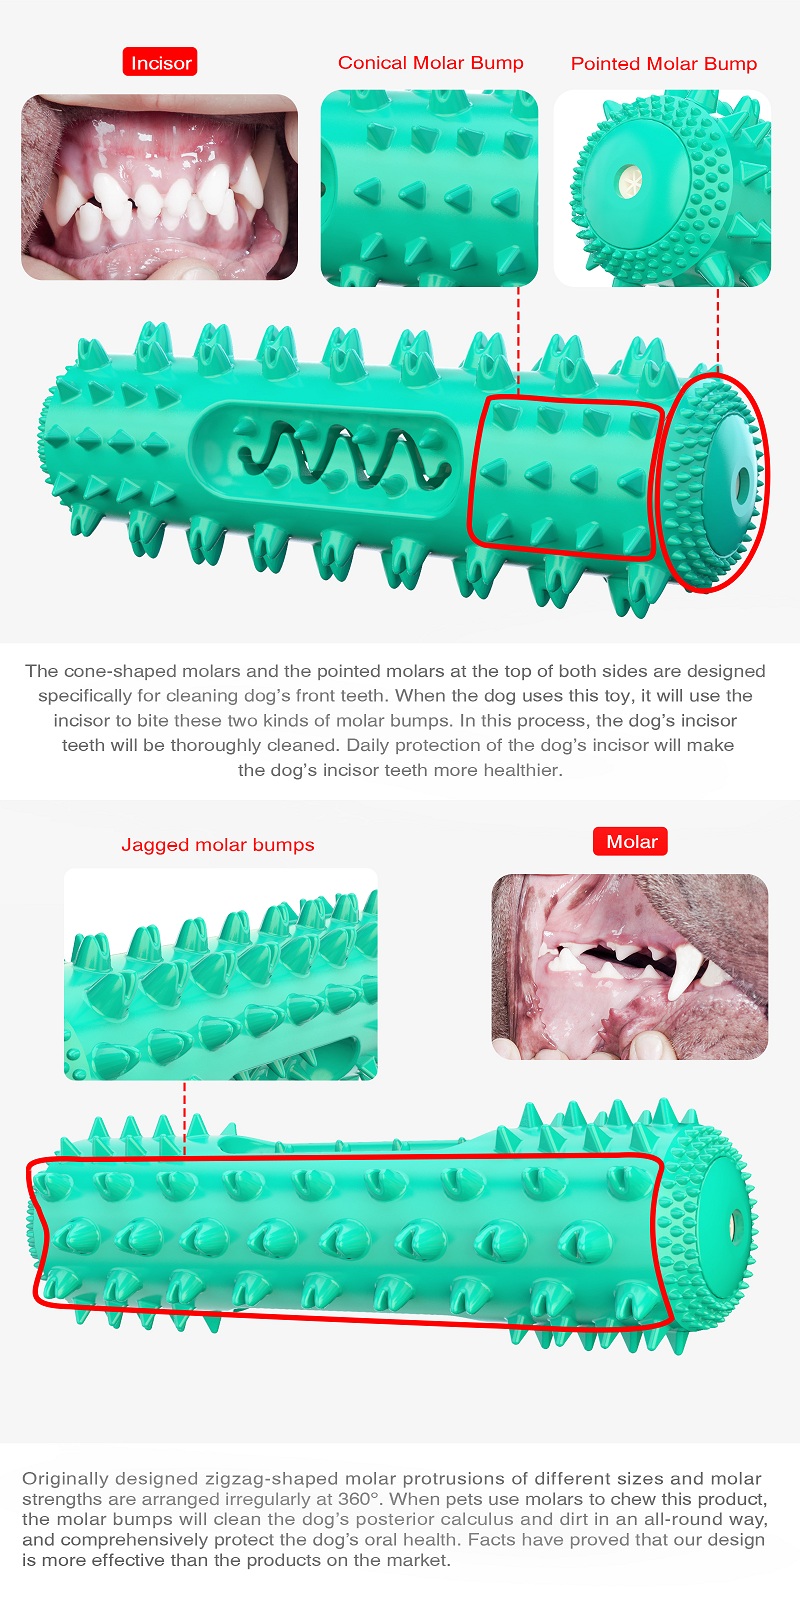 Amazon Best Seller TPR Teeth Cleaning Serrated Molar Rod Dog Toothbrush Chew Squeaky Pet Dog Toy